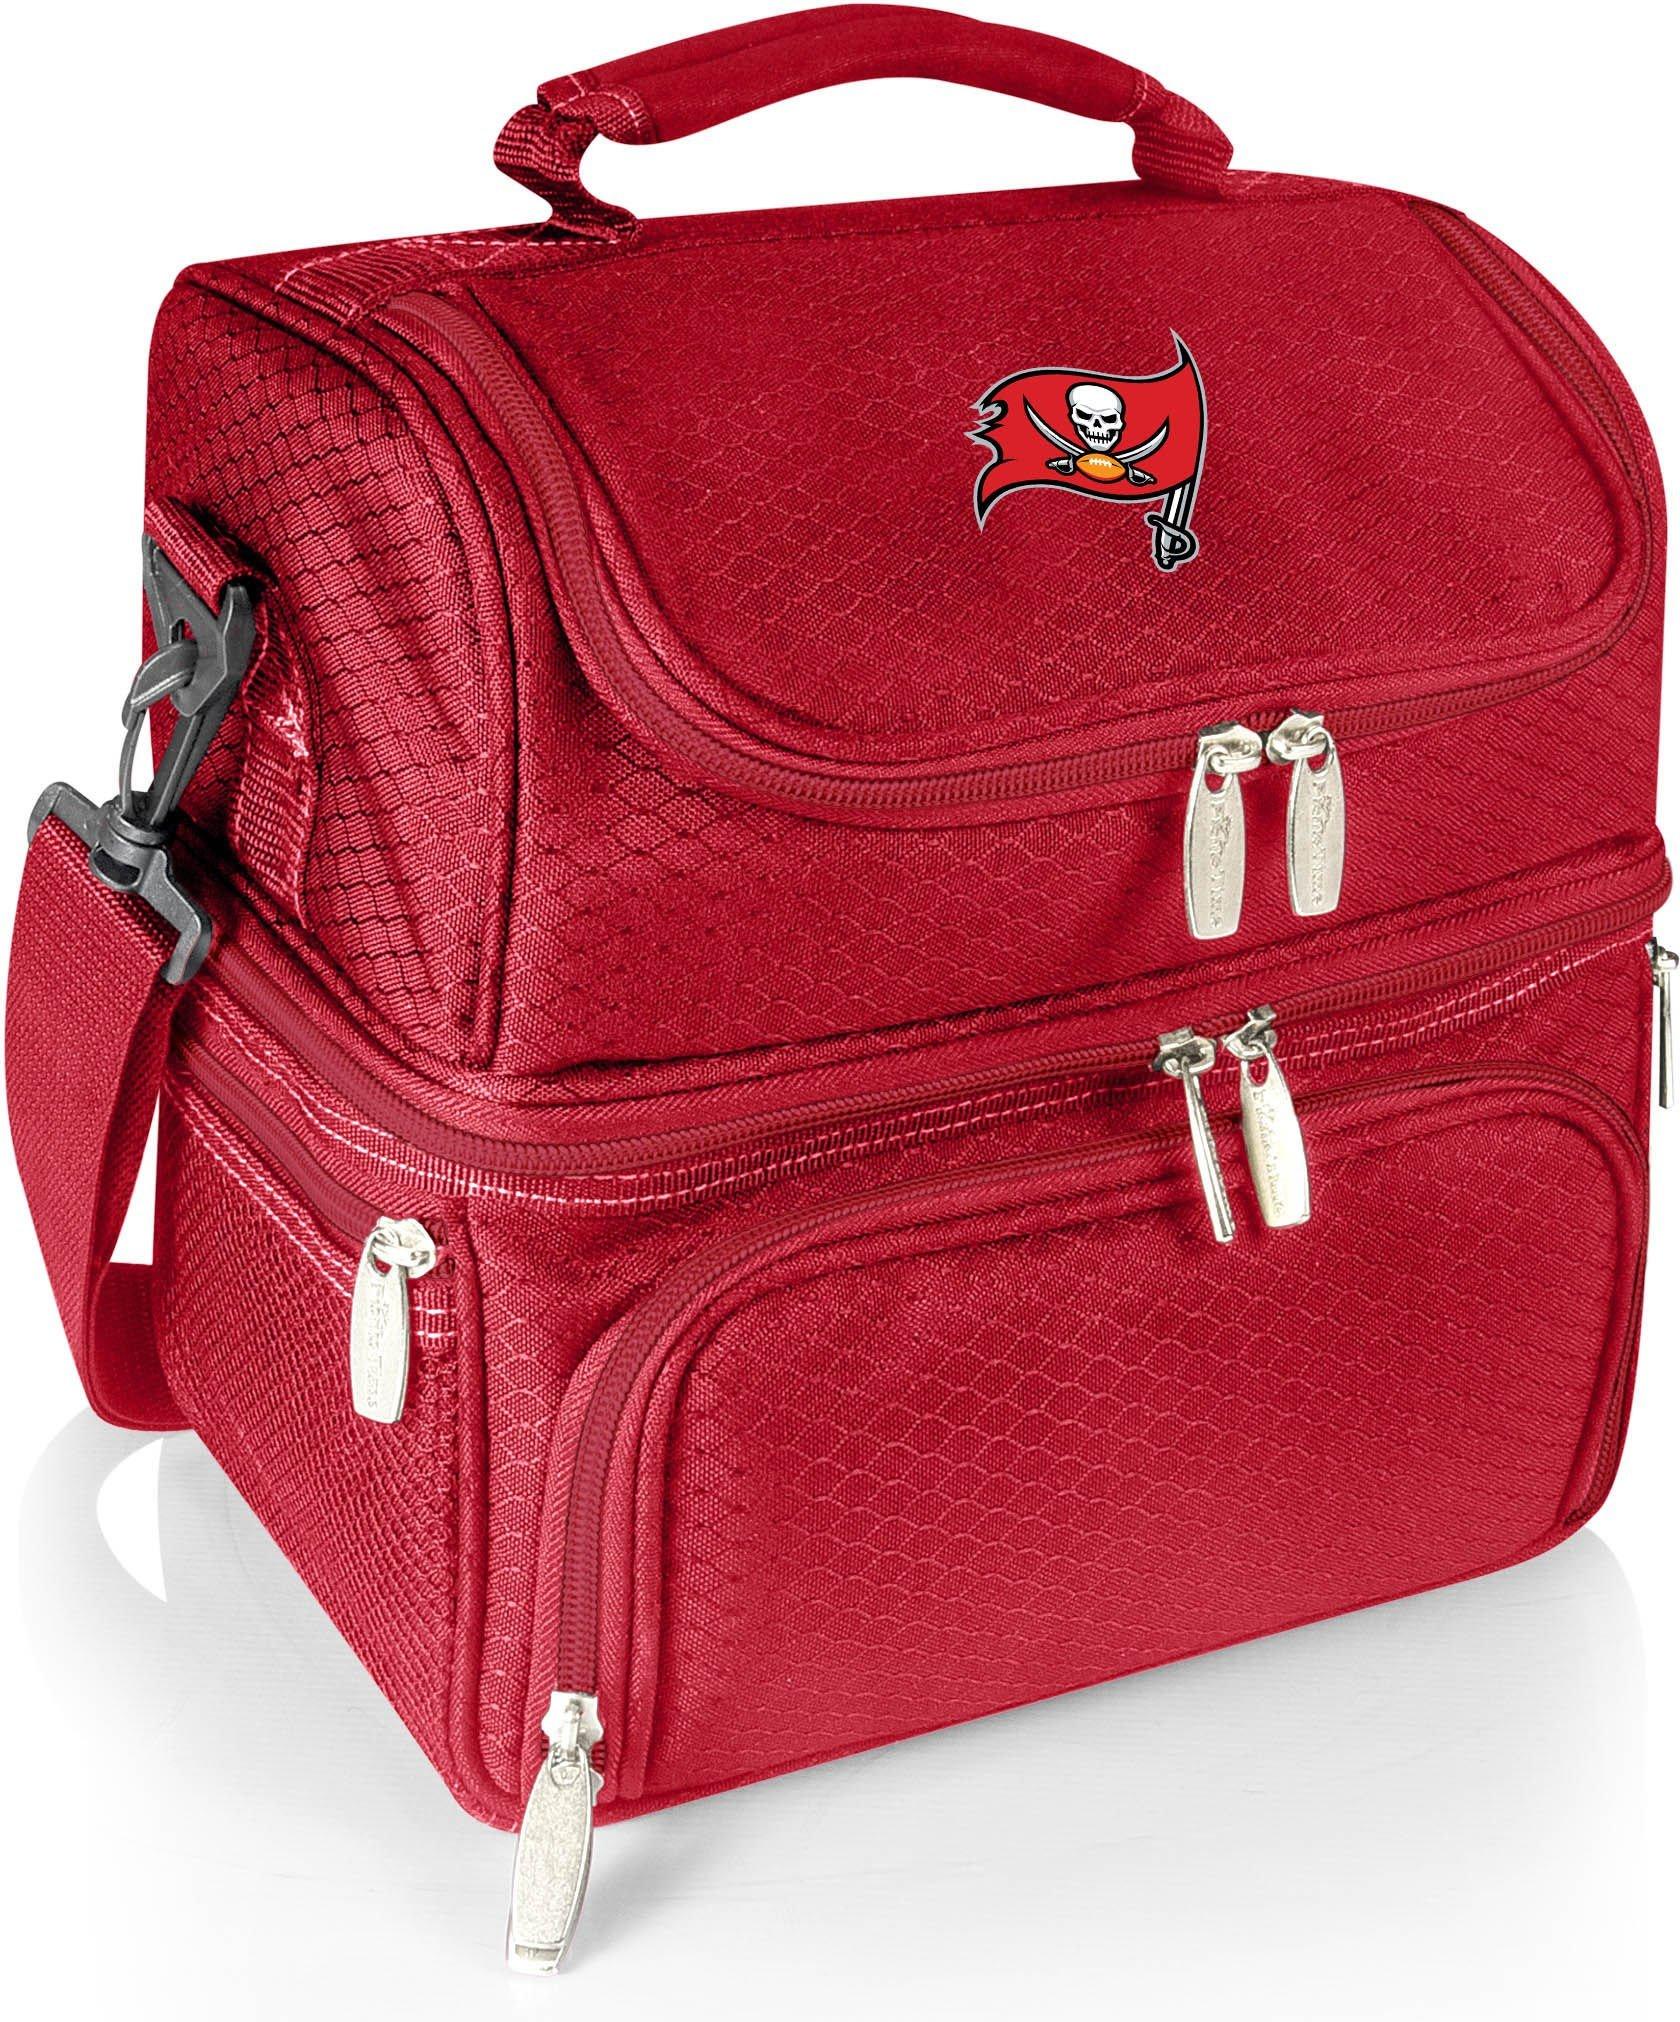 Tampa Bay Buccaneers Pranzo Tote by Oniva